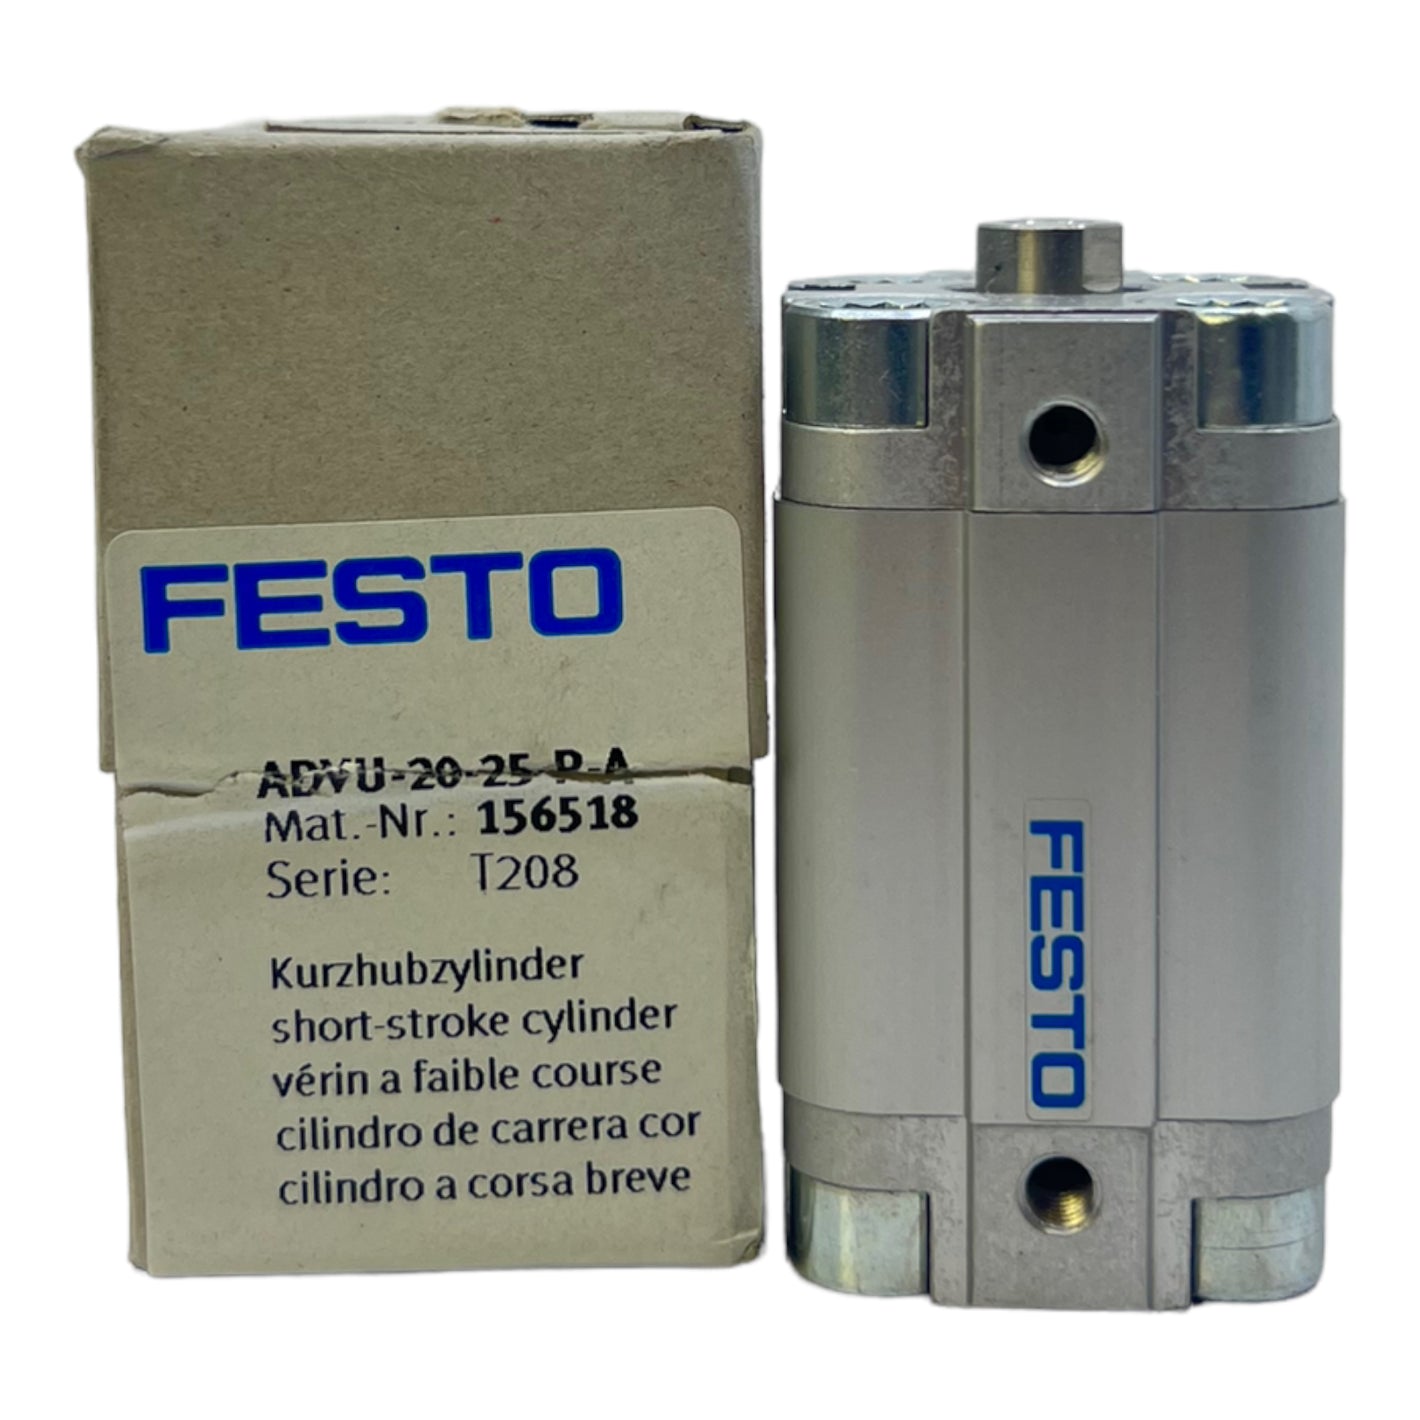 Festo ADVU-20-25-PA compact cylinder 156518 cylinder for proximity switch